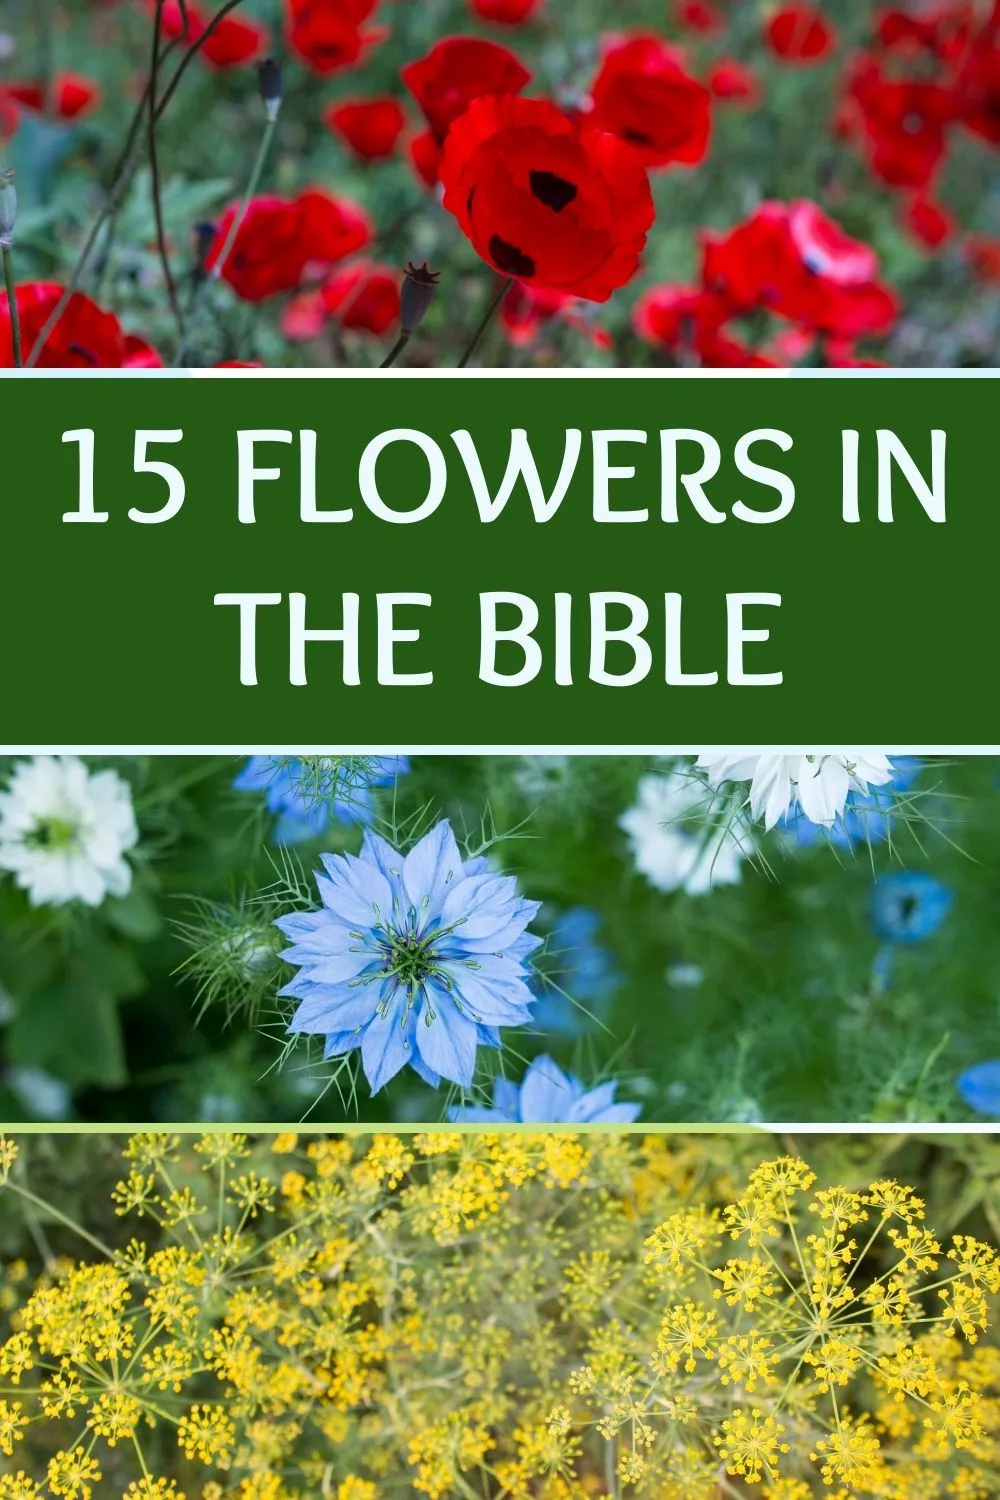 15 flowers in the Bible